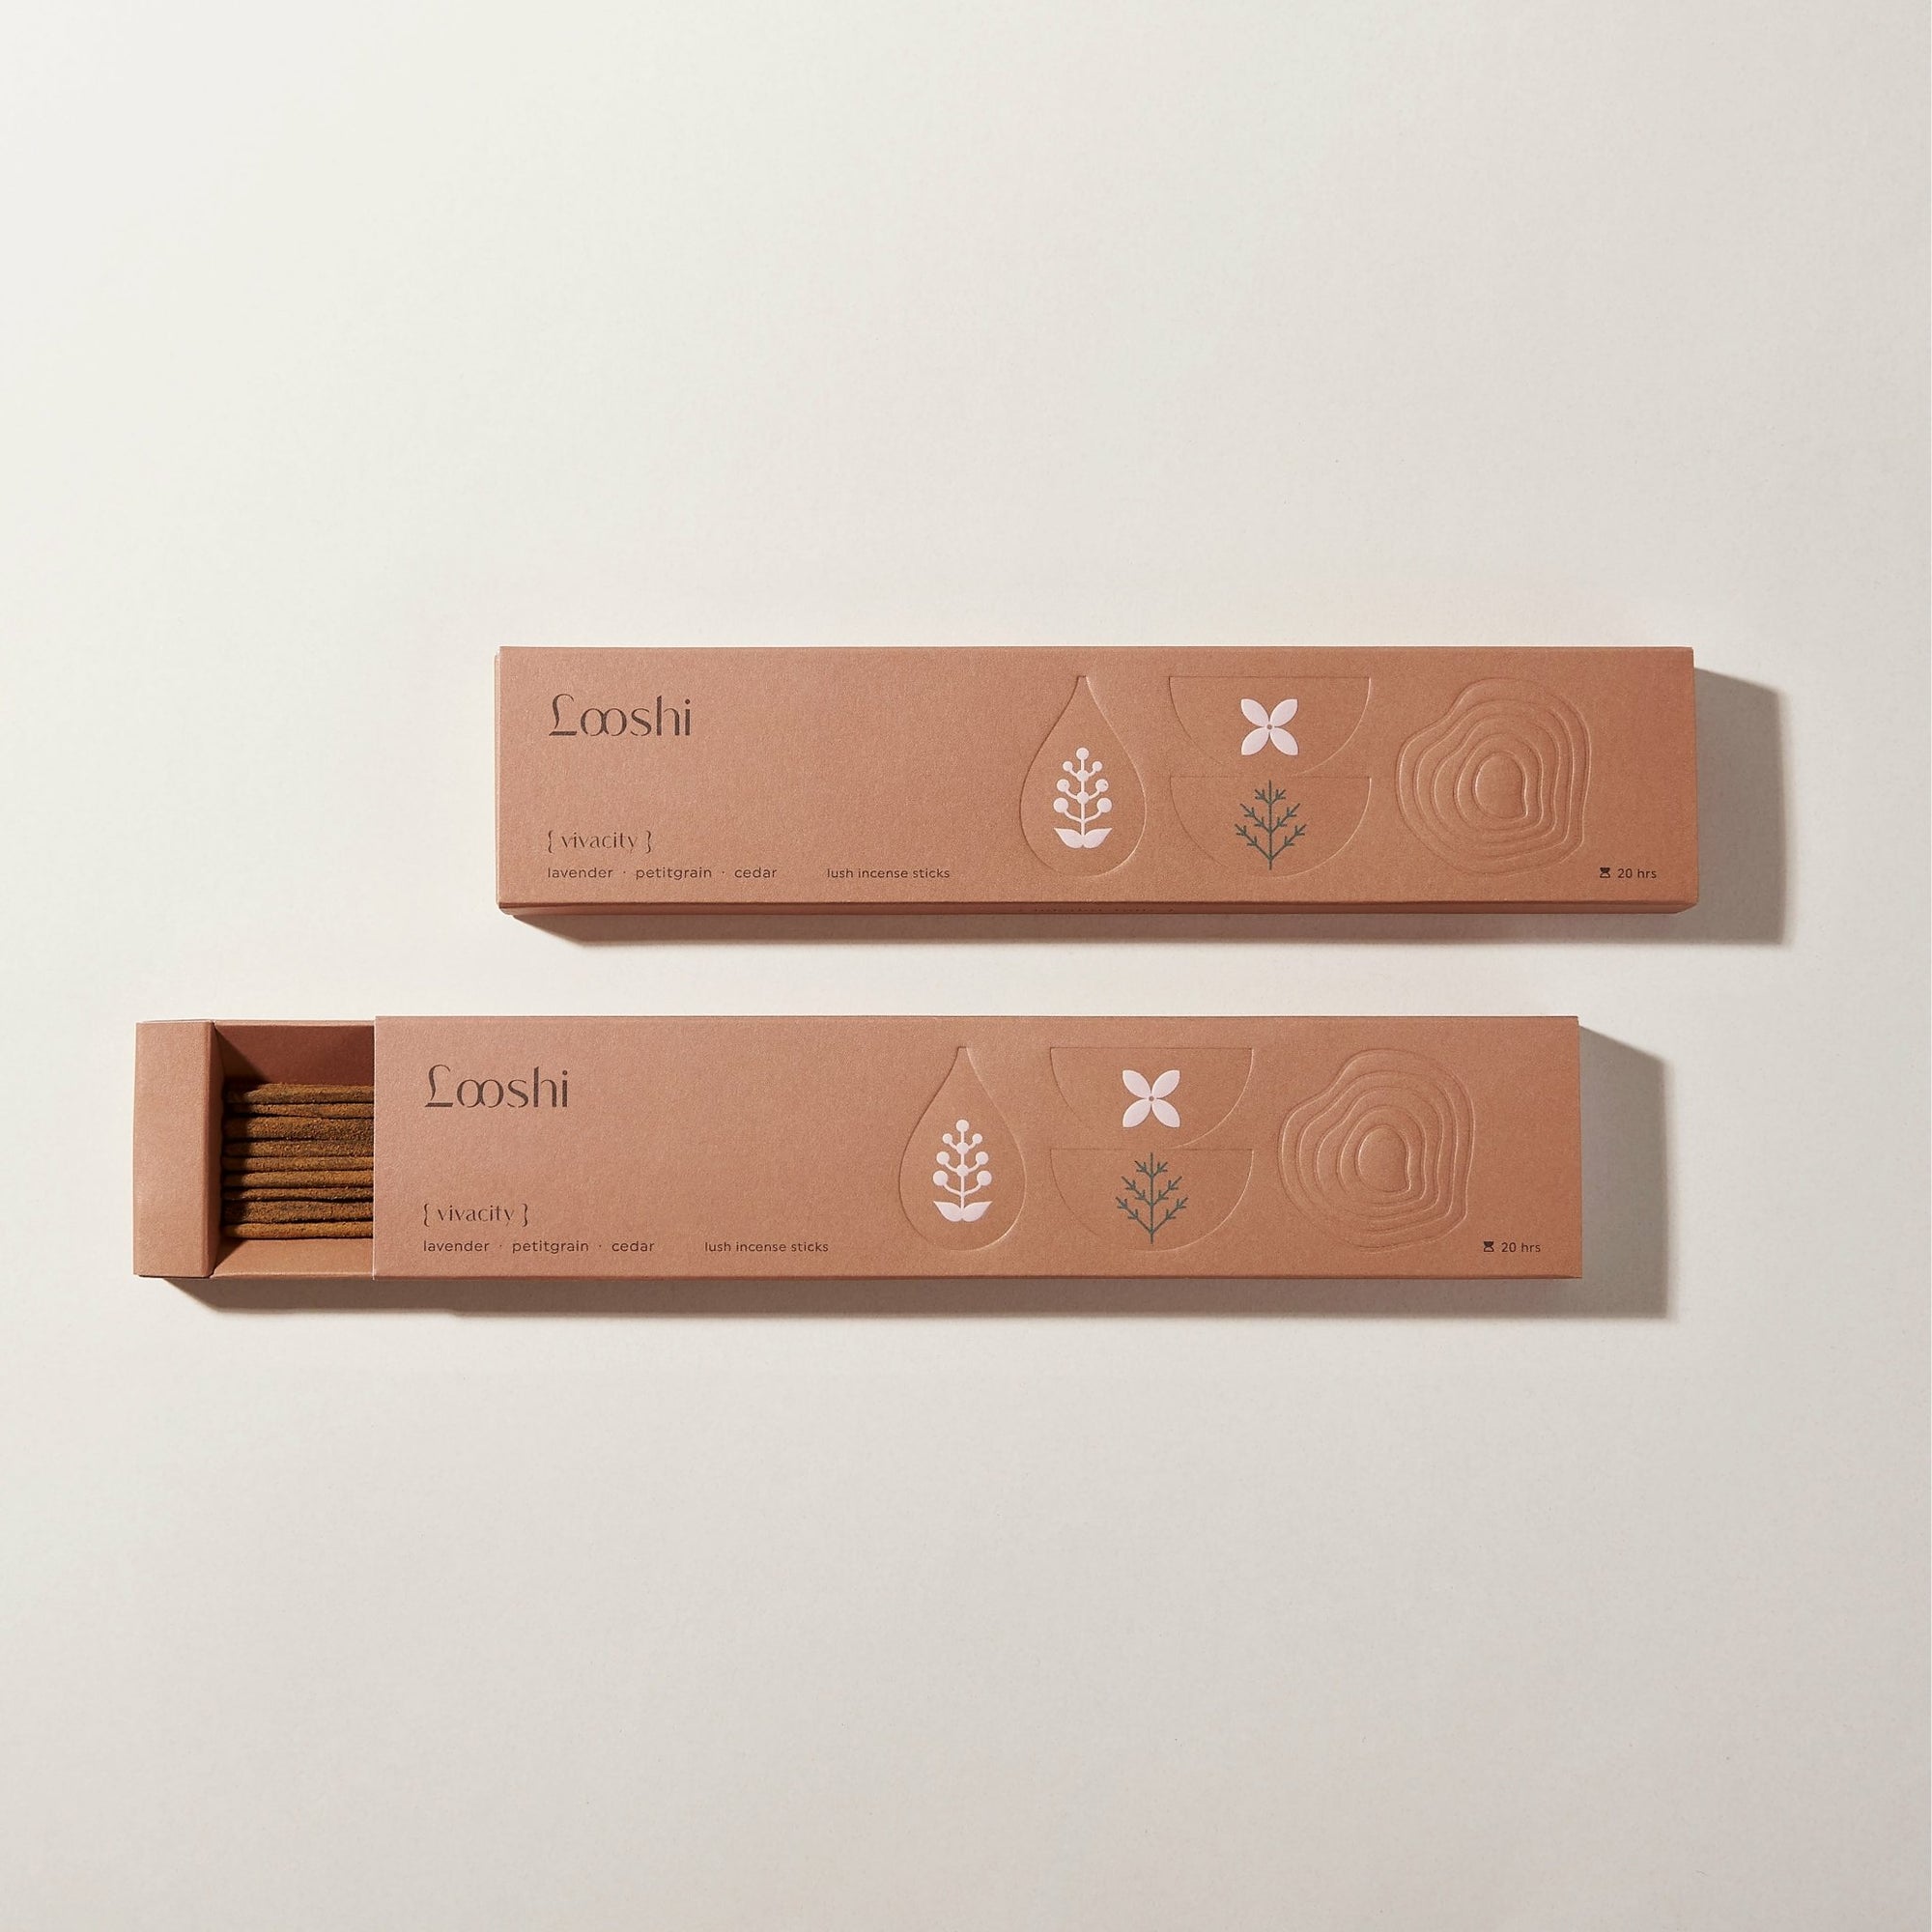 vivacity incense sticks from hellolooshi.